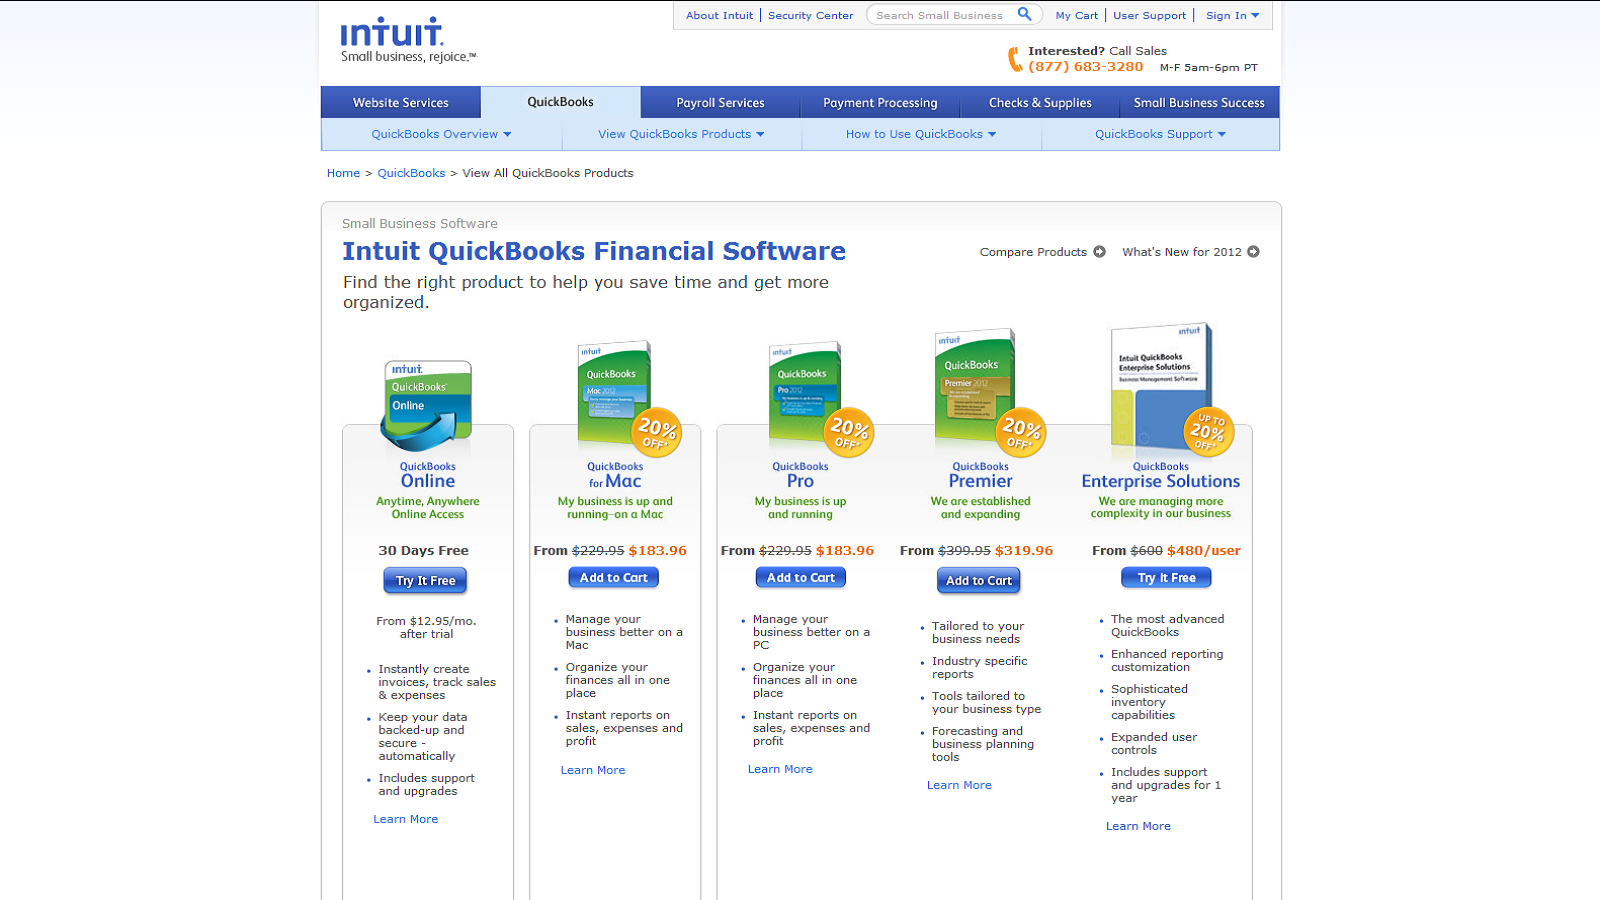 Save Up To 20% On QuickBooks Accounting Software Products!